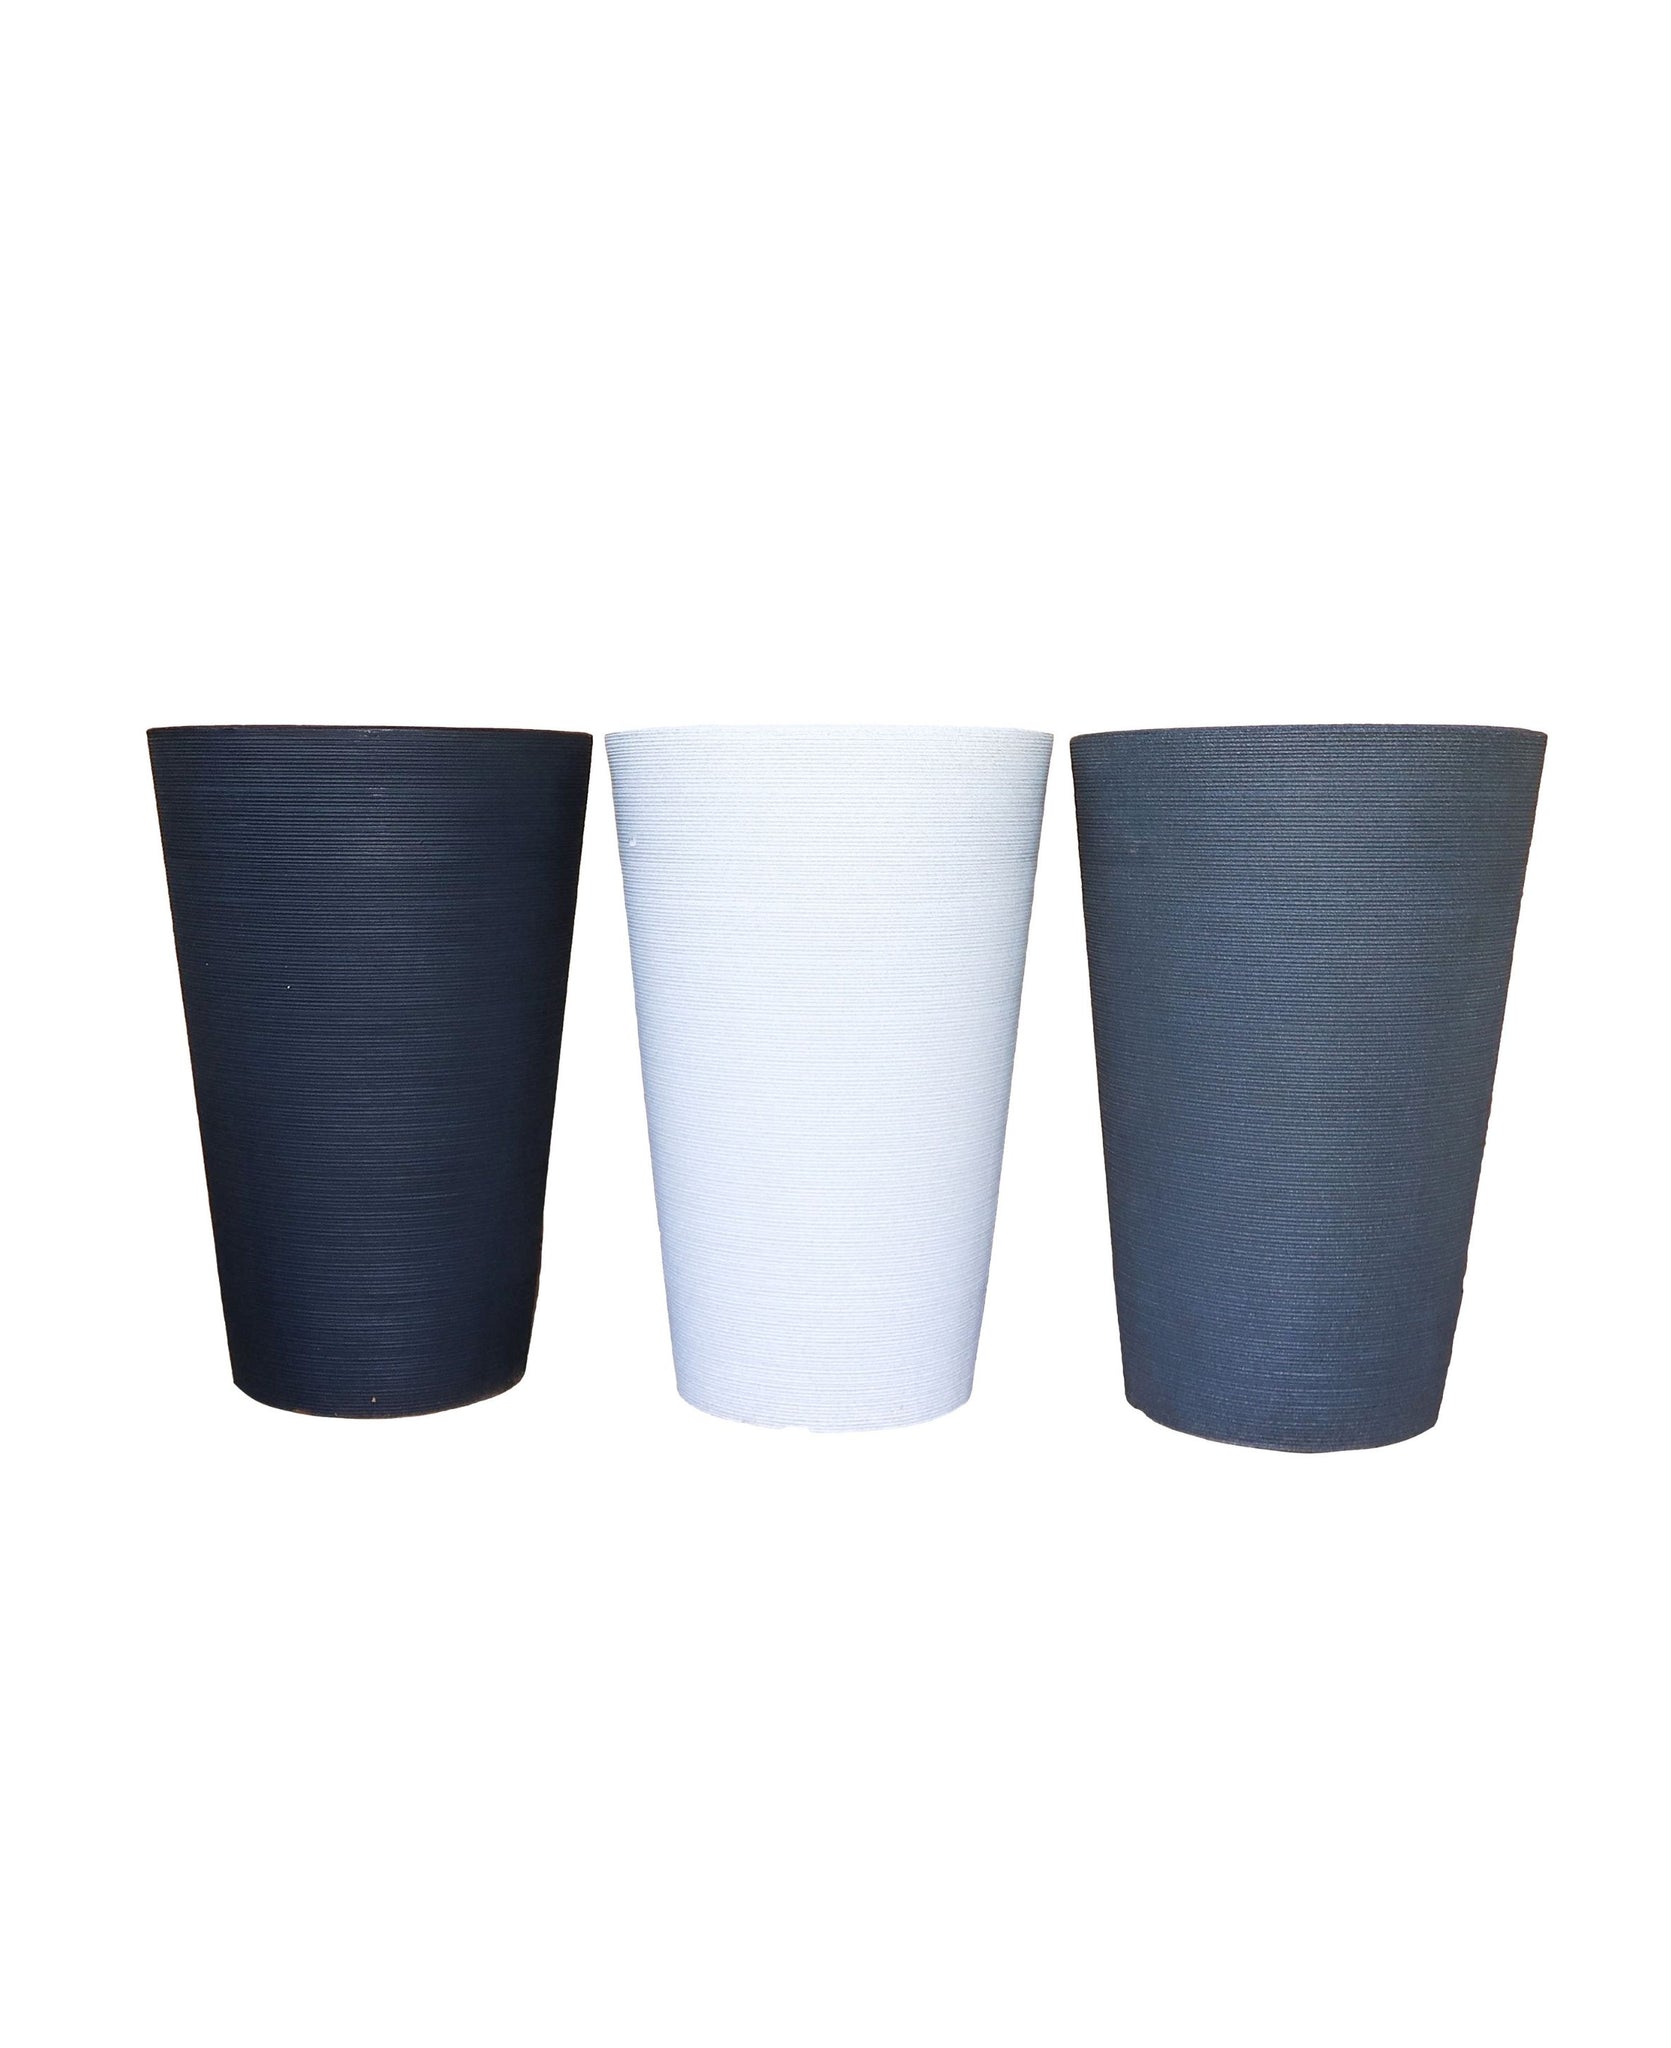 Tall, upright, Round Planters. Stylish. Modern. On trend linear design.